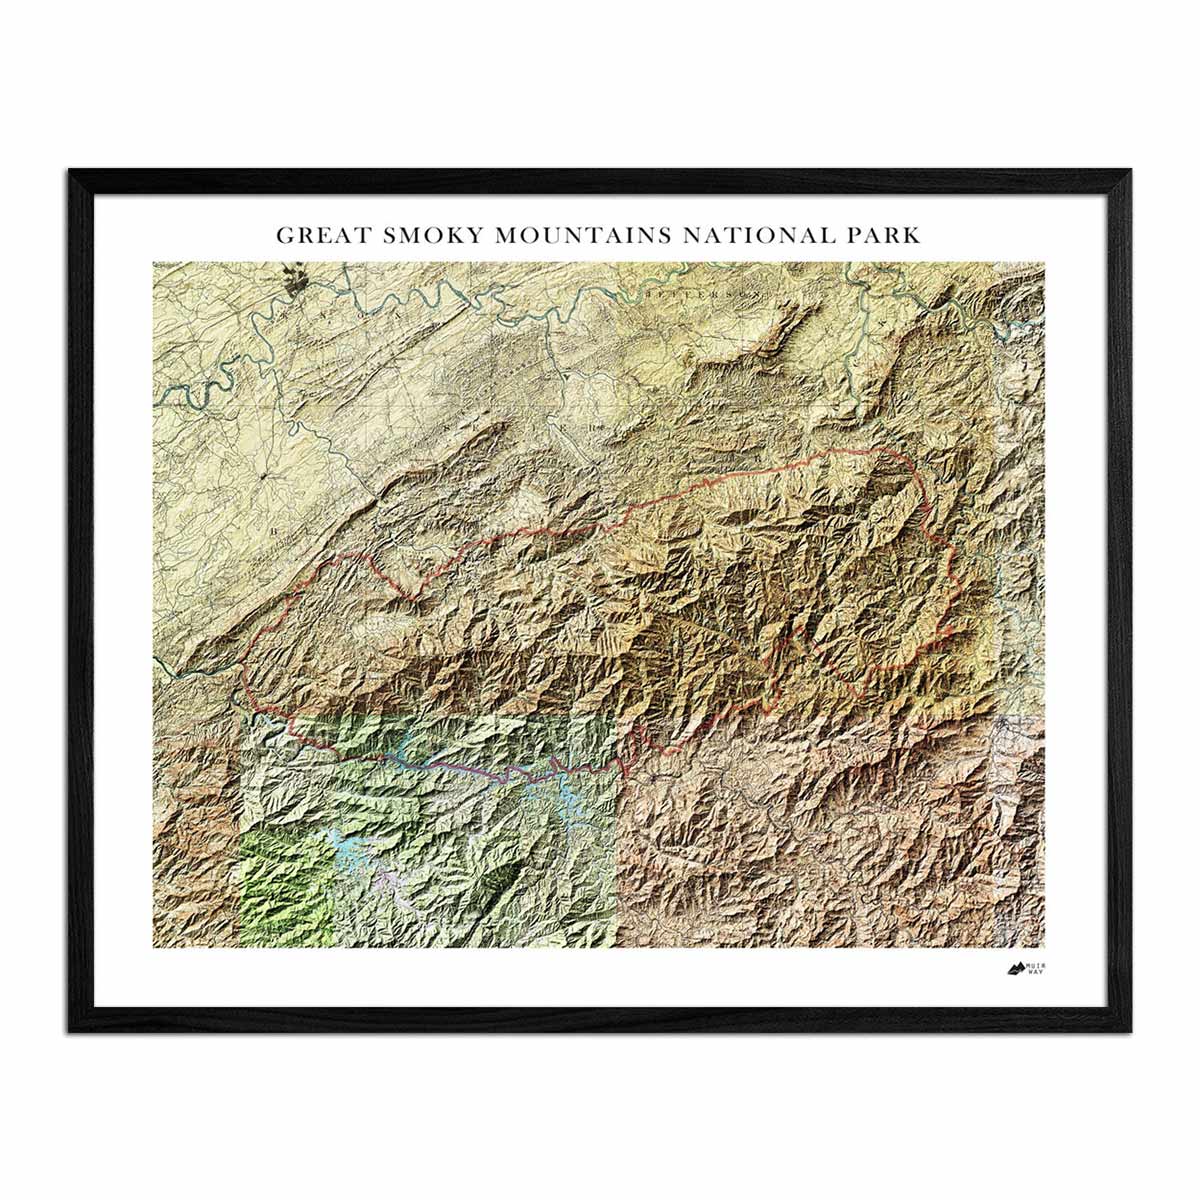 Relief Map of Great Smoky Mountains National Park